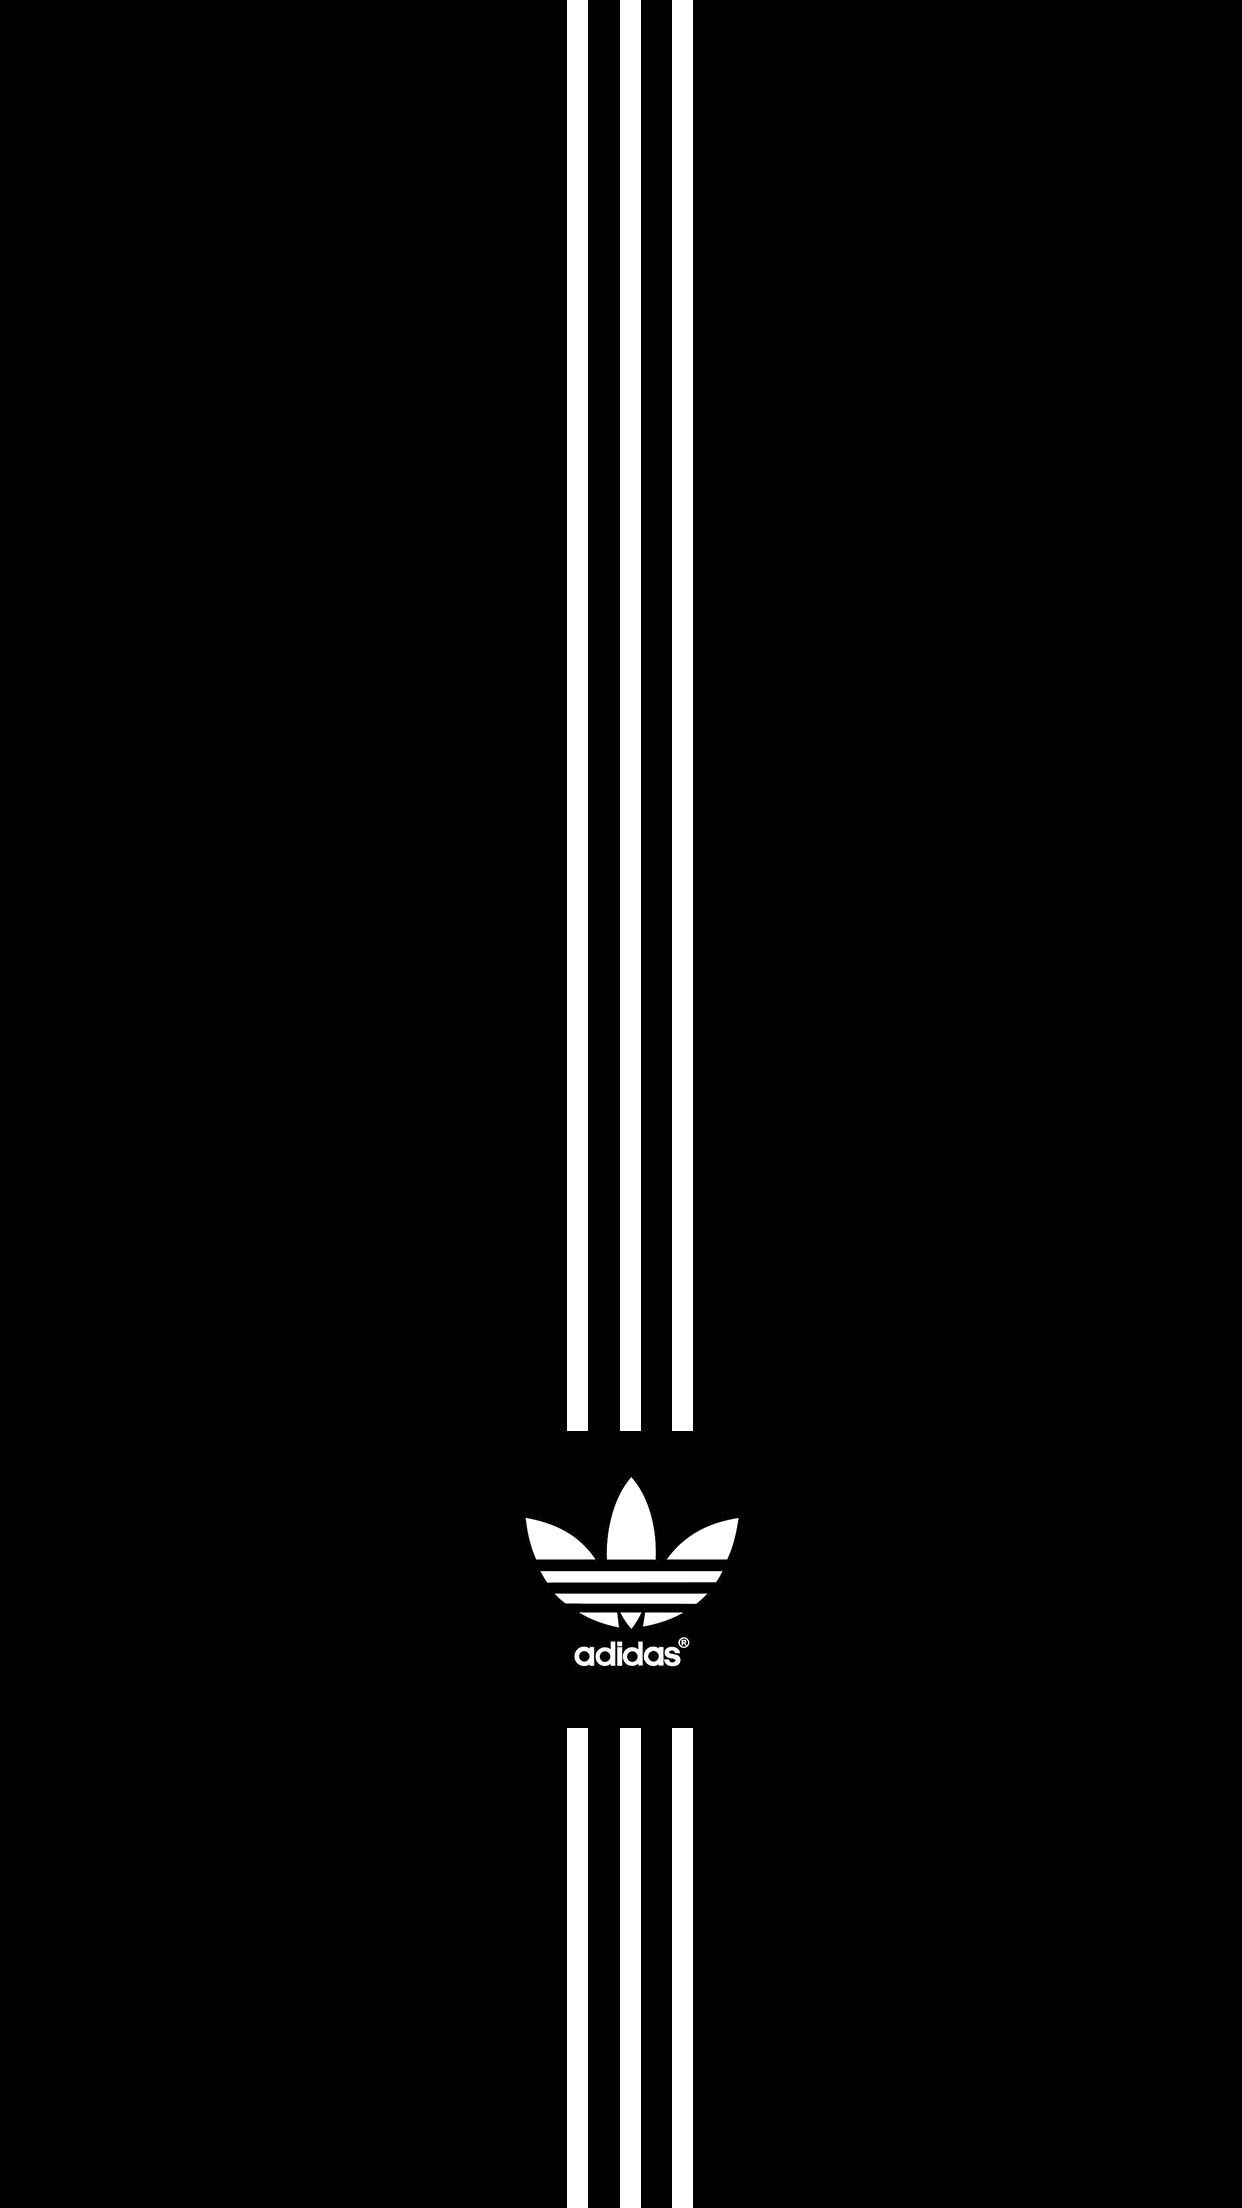 Adidas Black And White Aesthetics Wallpapers